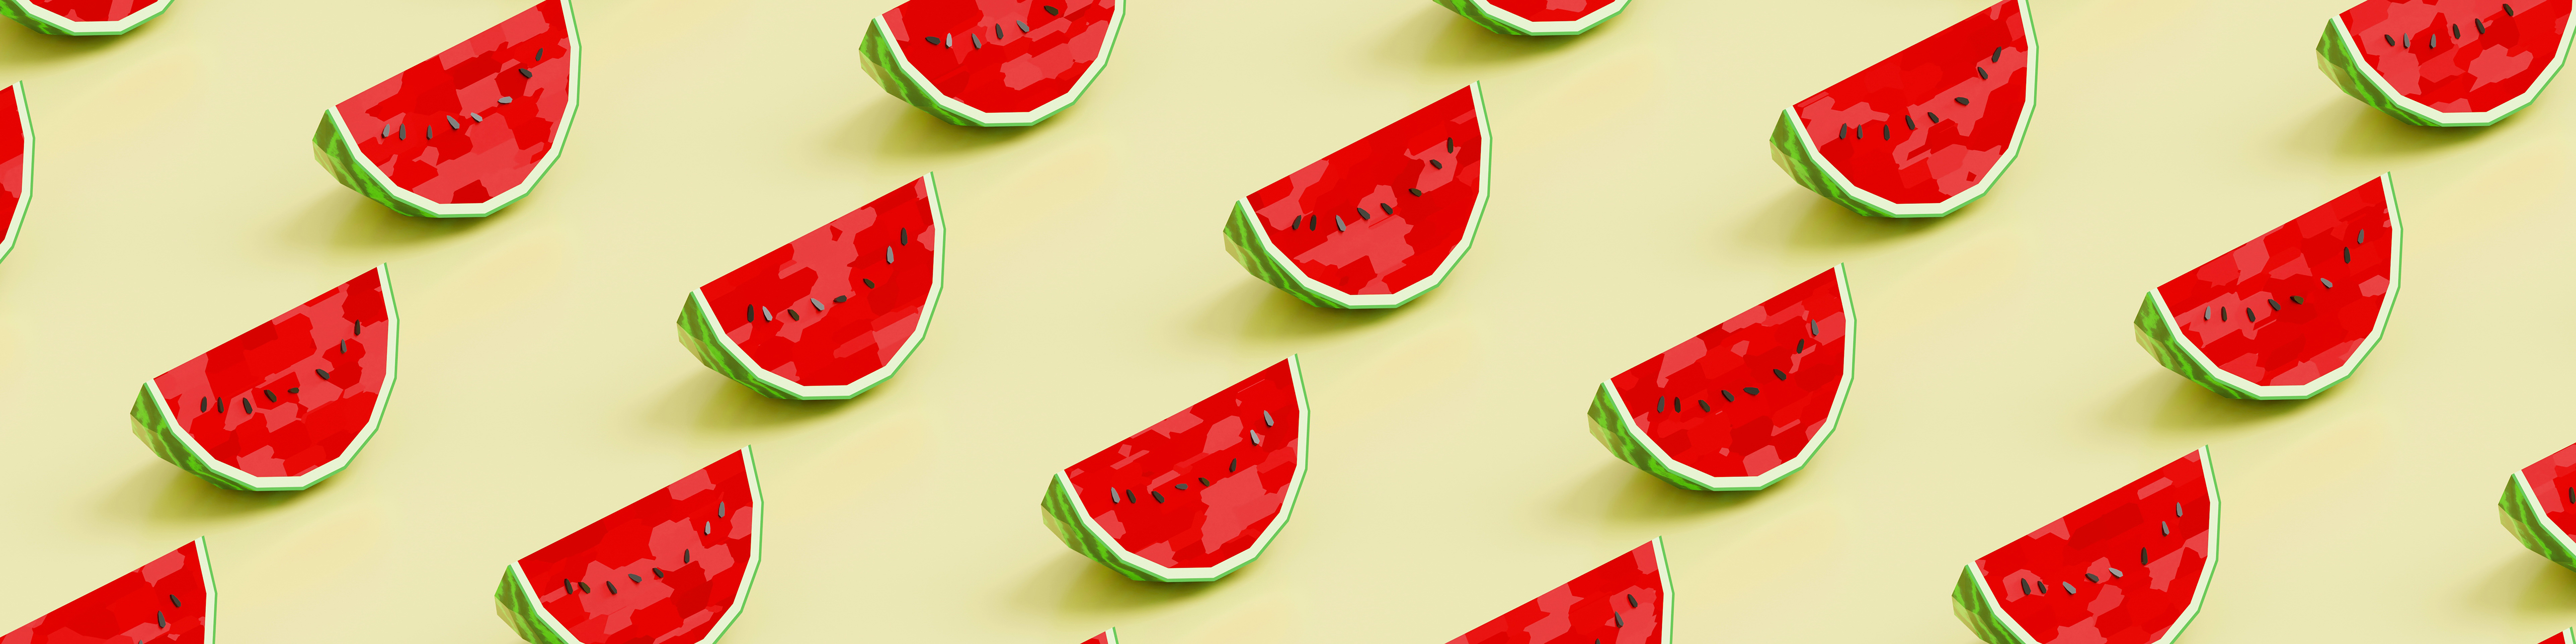 Seamless pattern of slices of watermelon filling the frame